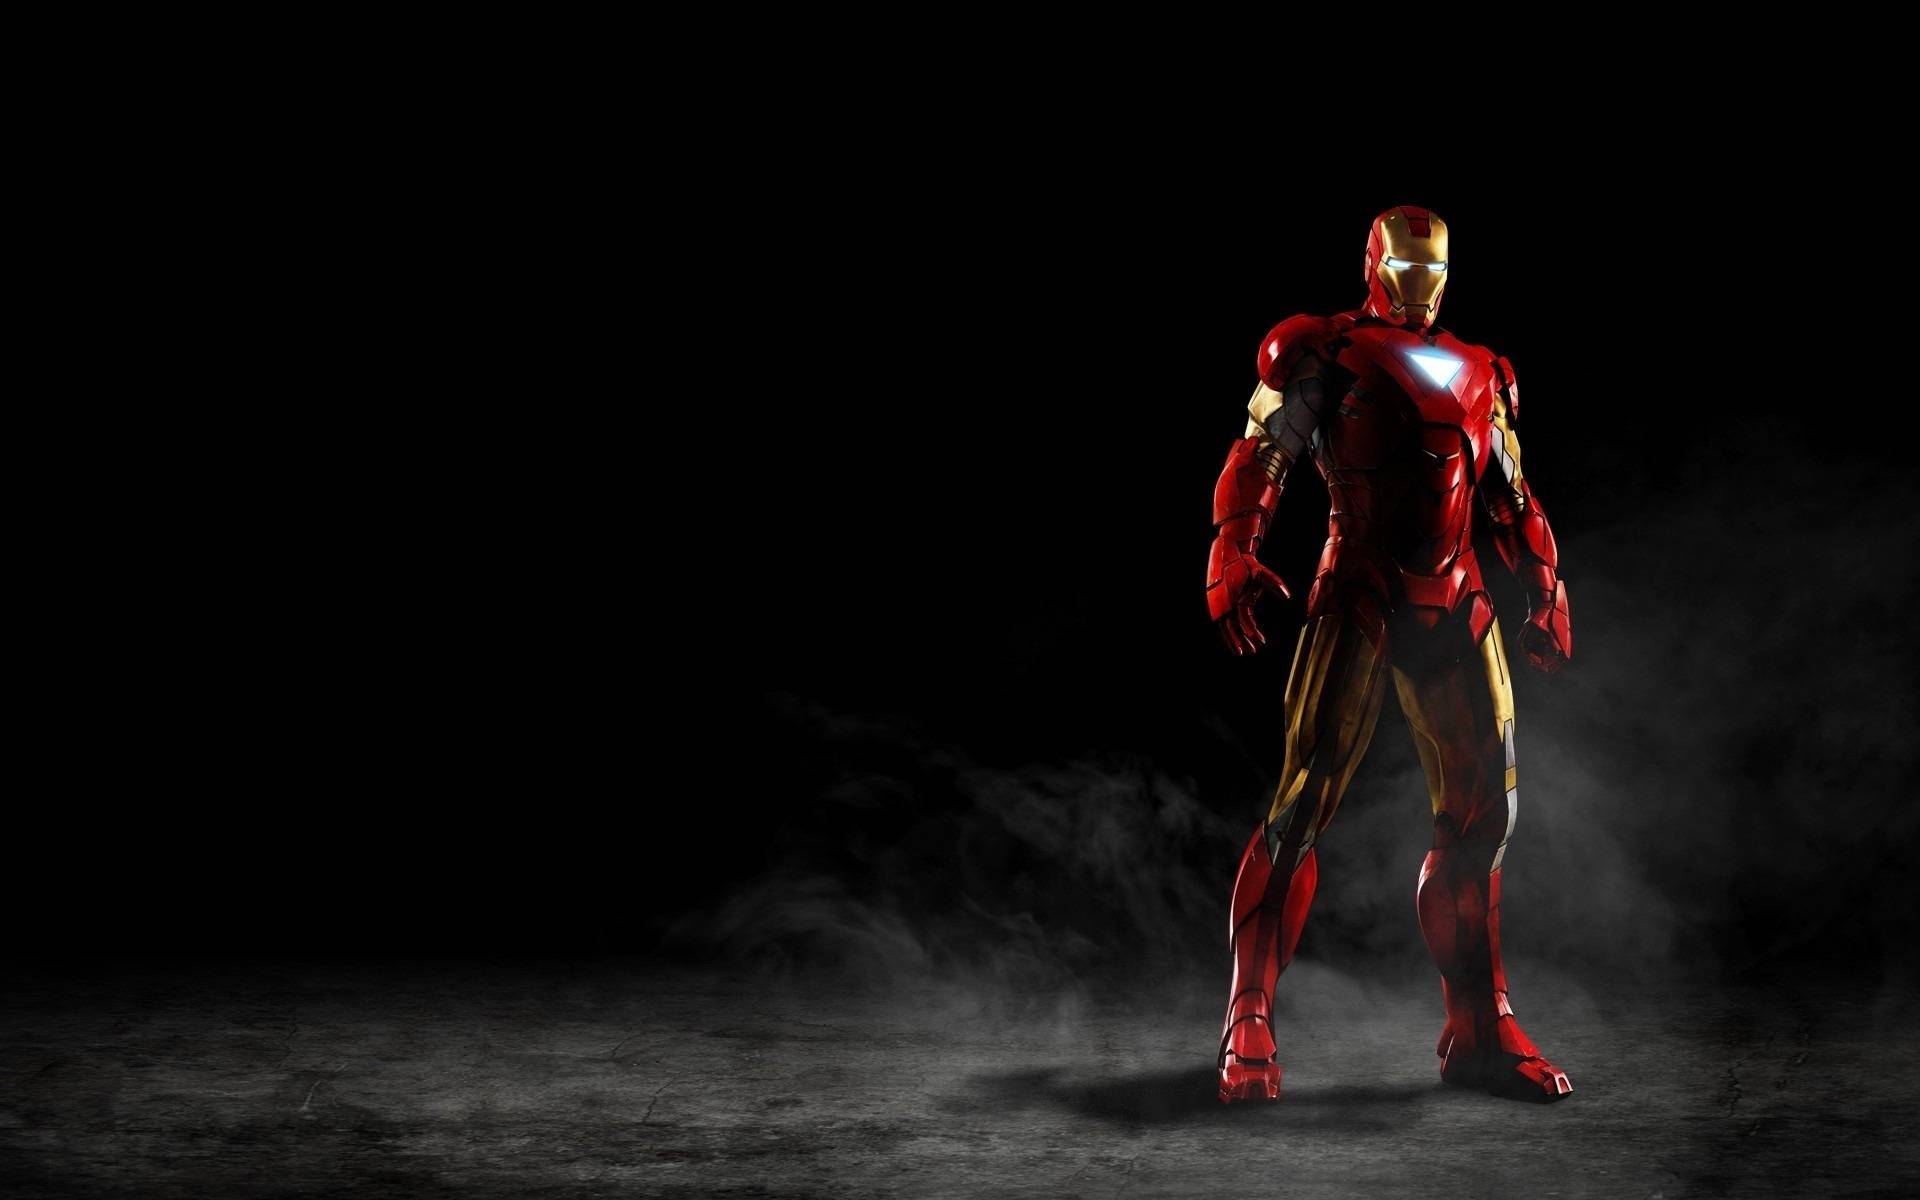 Iron Man Avengers Wallpaper High Quality Resolution with High